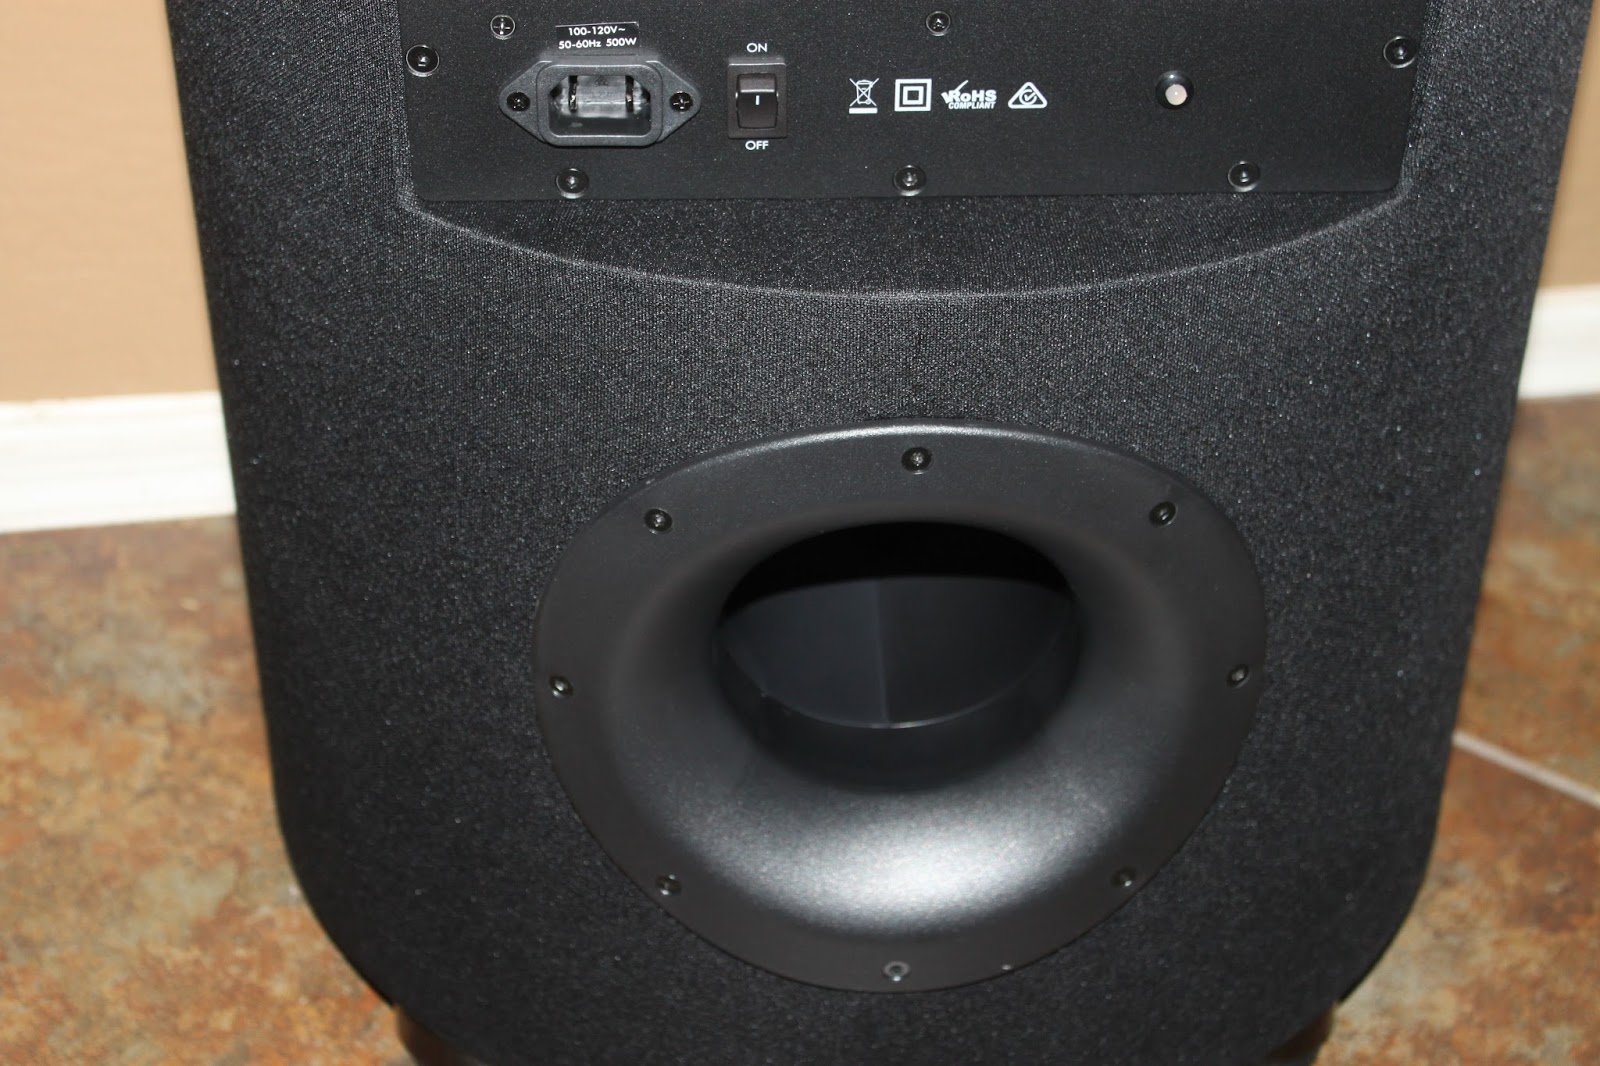 Stereowise Plus Svs Pc 00 Home Theater Subwoofer Review